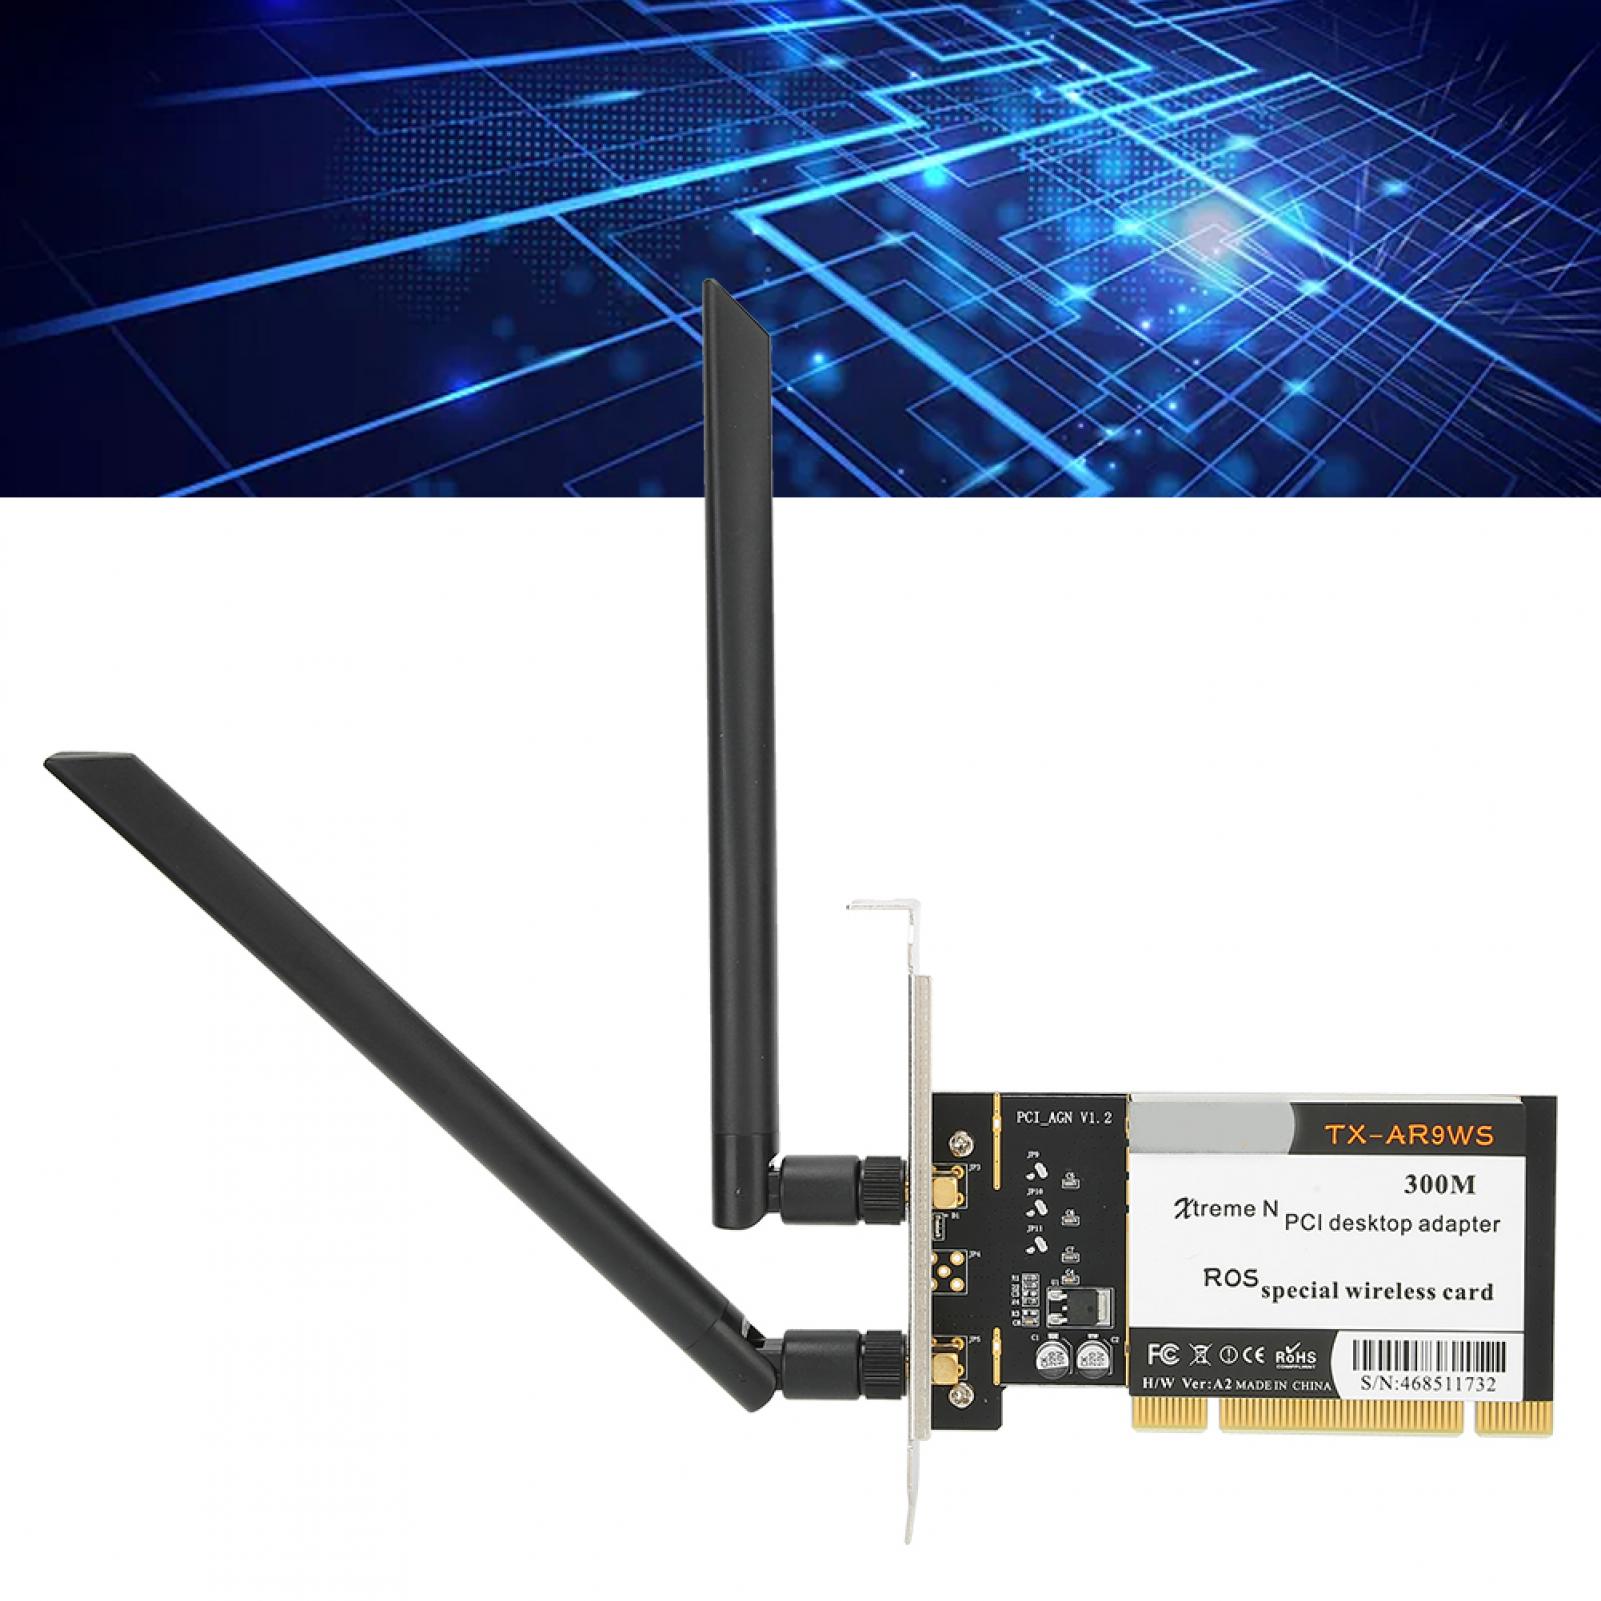 PCI Wifi Card Network Card, Ar9220 PCI Desktop Adapter, For Xp 32/64 - image 4 of 8